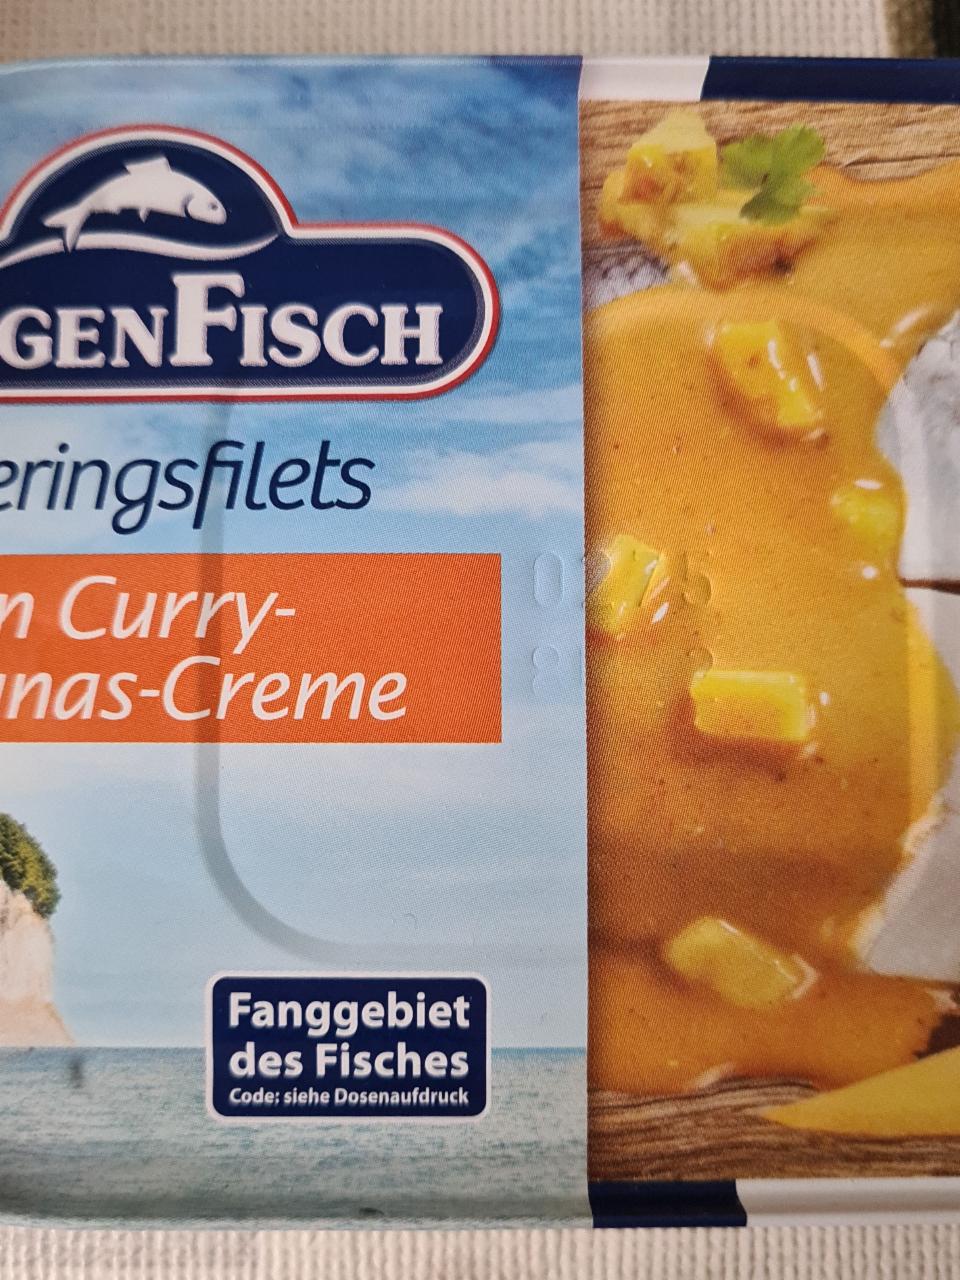 Fotografie - RugenFisch Heringsfilets in Curry-Ananas-Creme